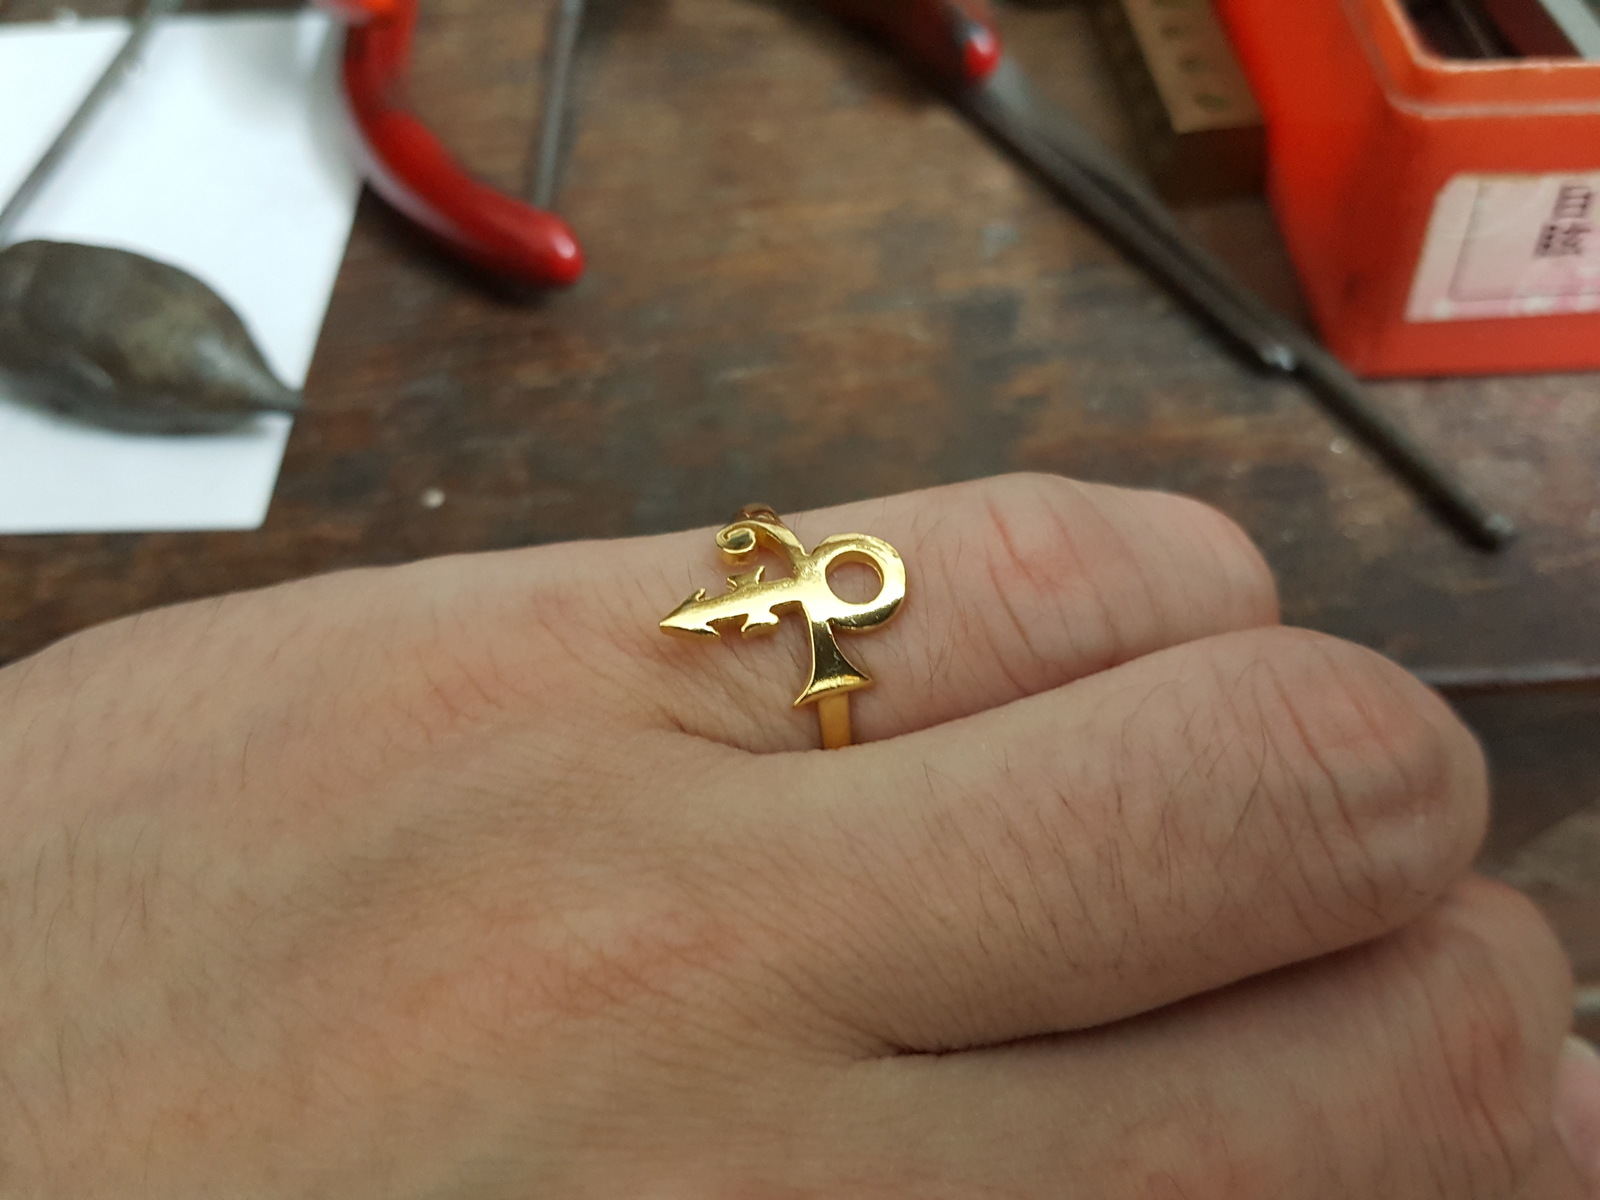 14k gold remembrance jewelry